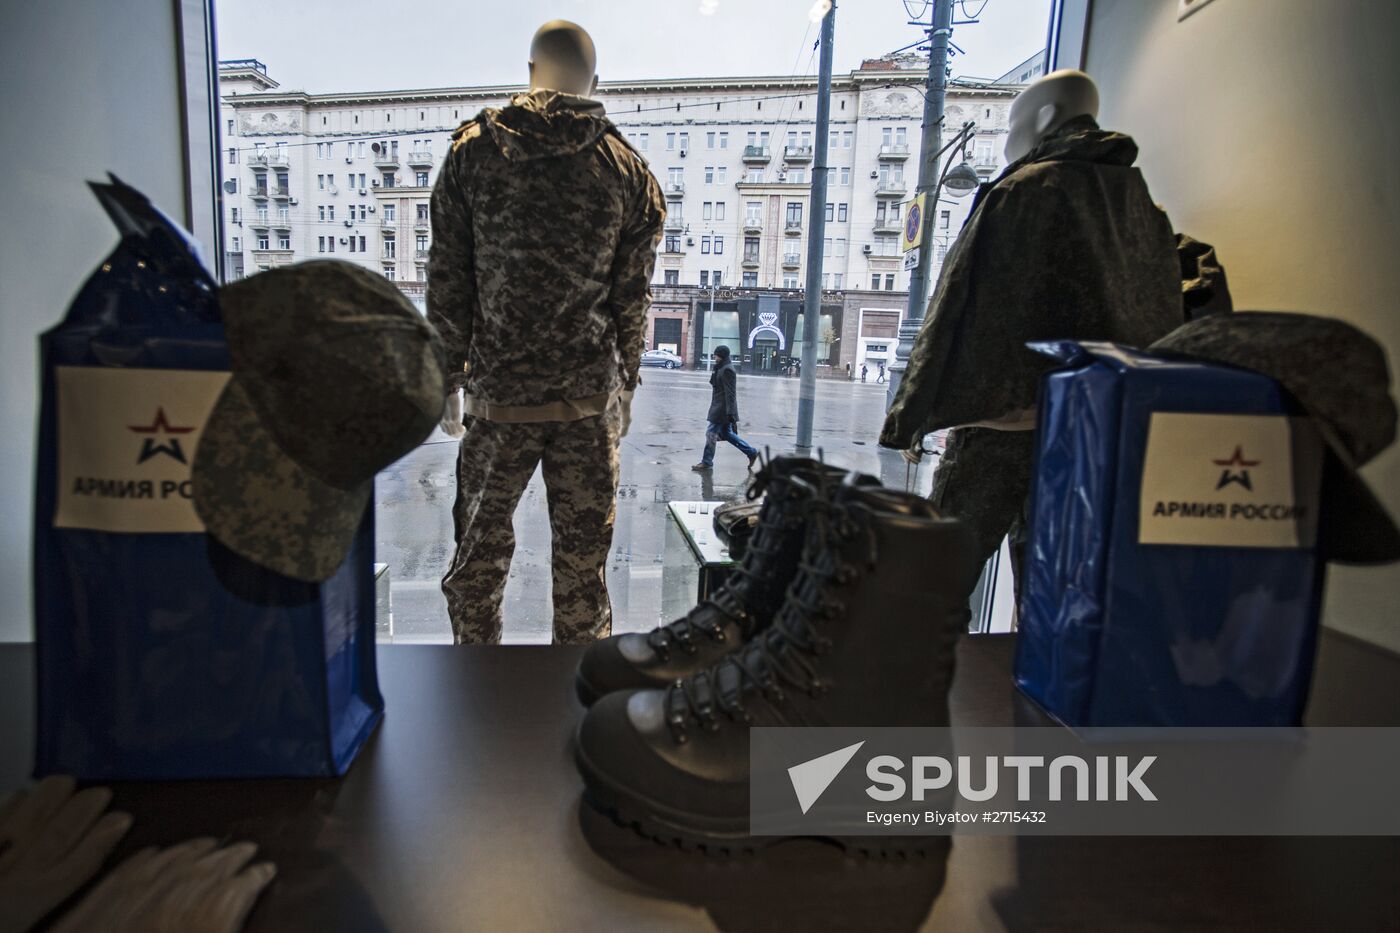 Army of Russia store in Moscow.